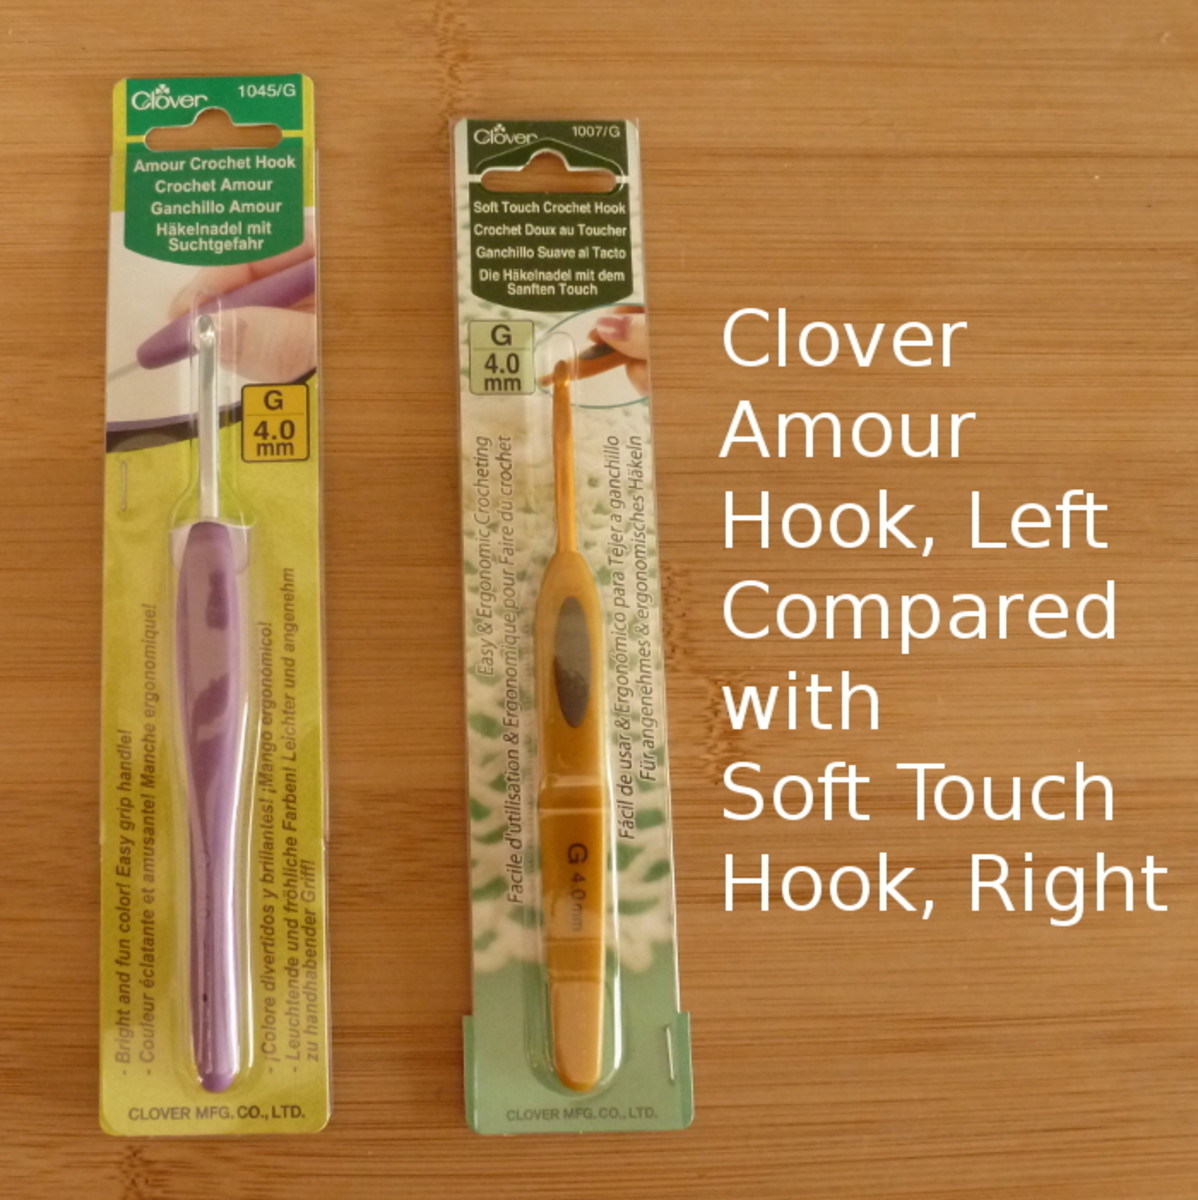 You can see the Soft Touch has a shorter shank which is ideal for amigurumi or toy making where shorter stitches tend to be used. 